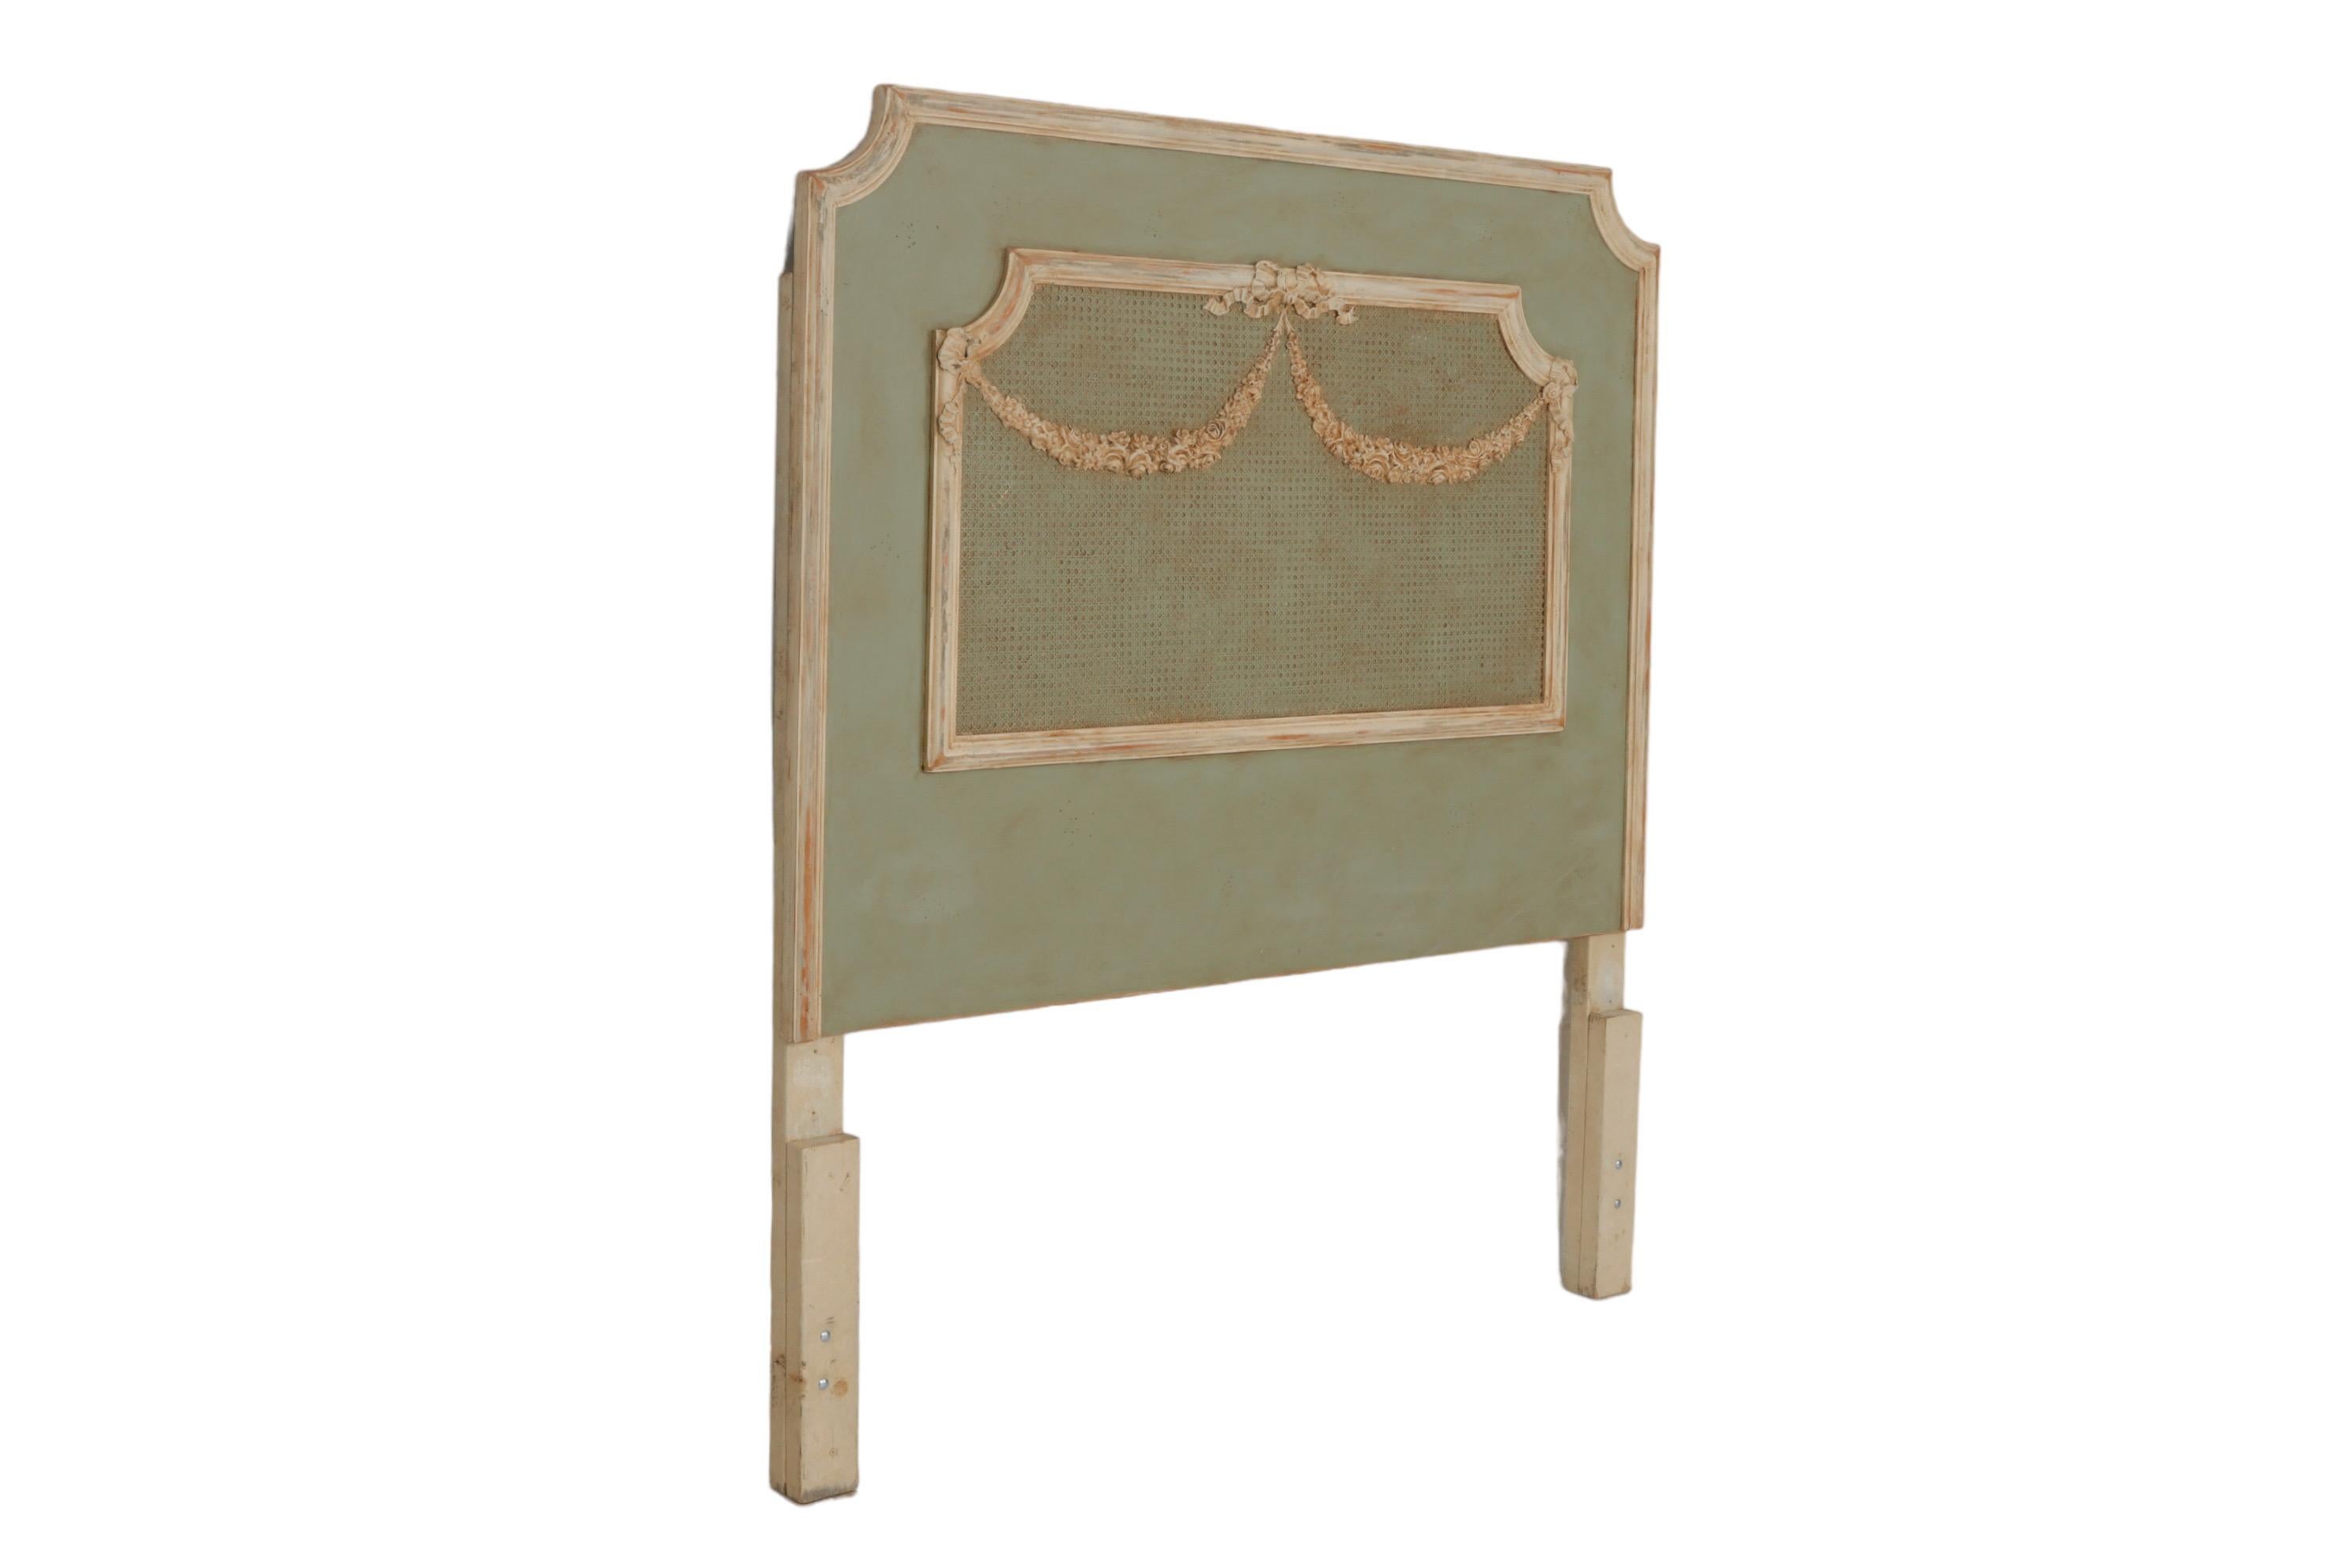 A French Louis XVI style queen size headboard. A caned center is decorated with carved ribbon and rose swag details. Painted in a sage green and trimmed with cream, with subtle distressed edges and an antique patina. Made by Gildid of Atlanta.